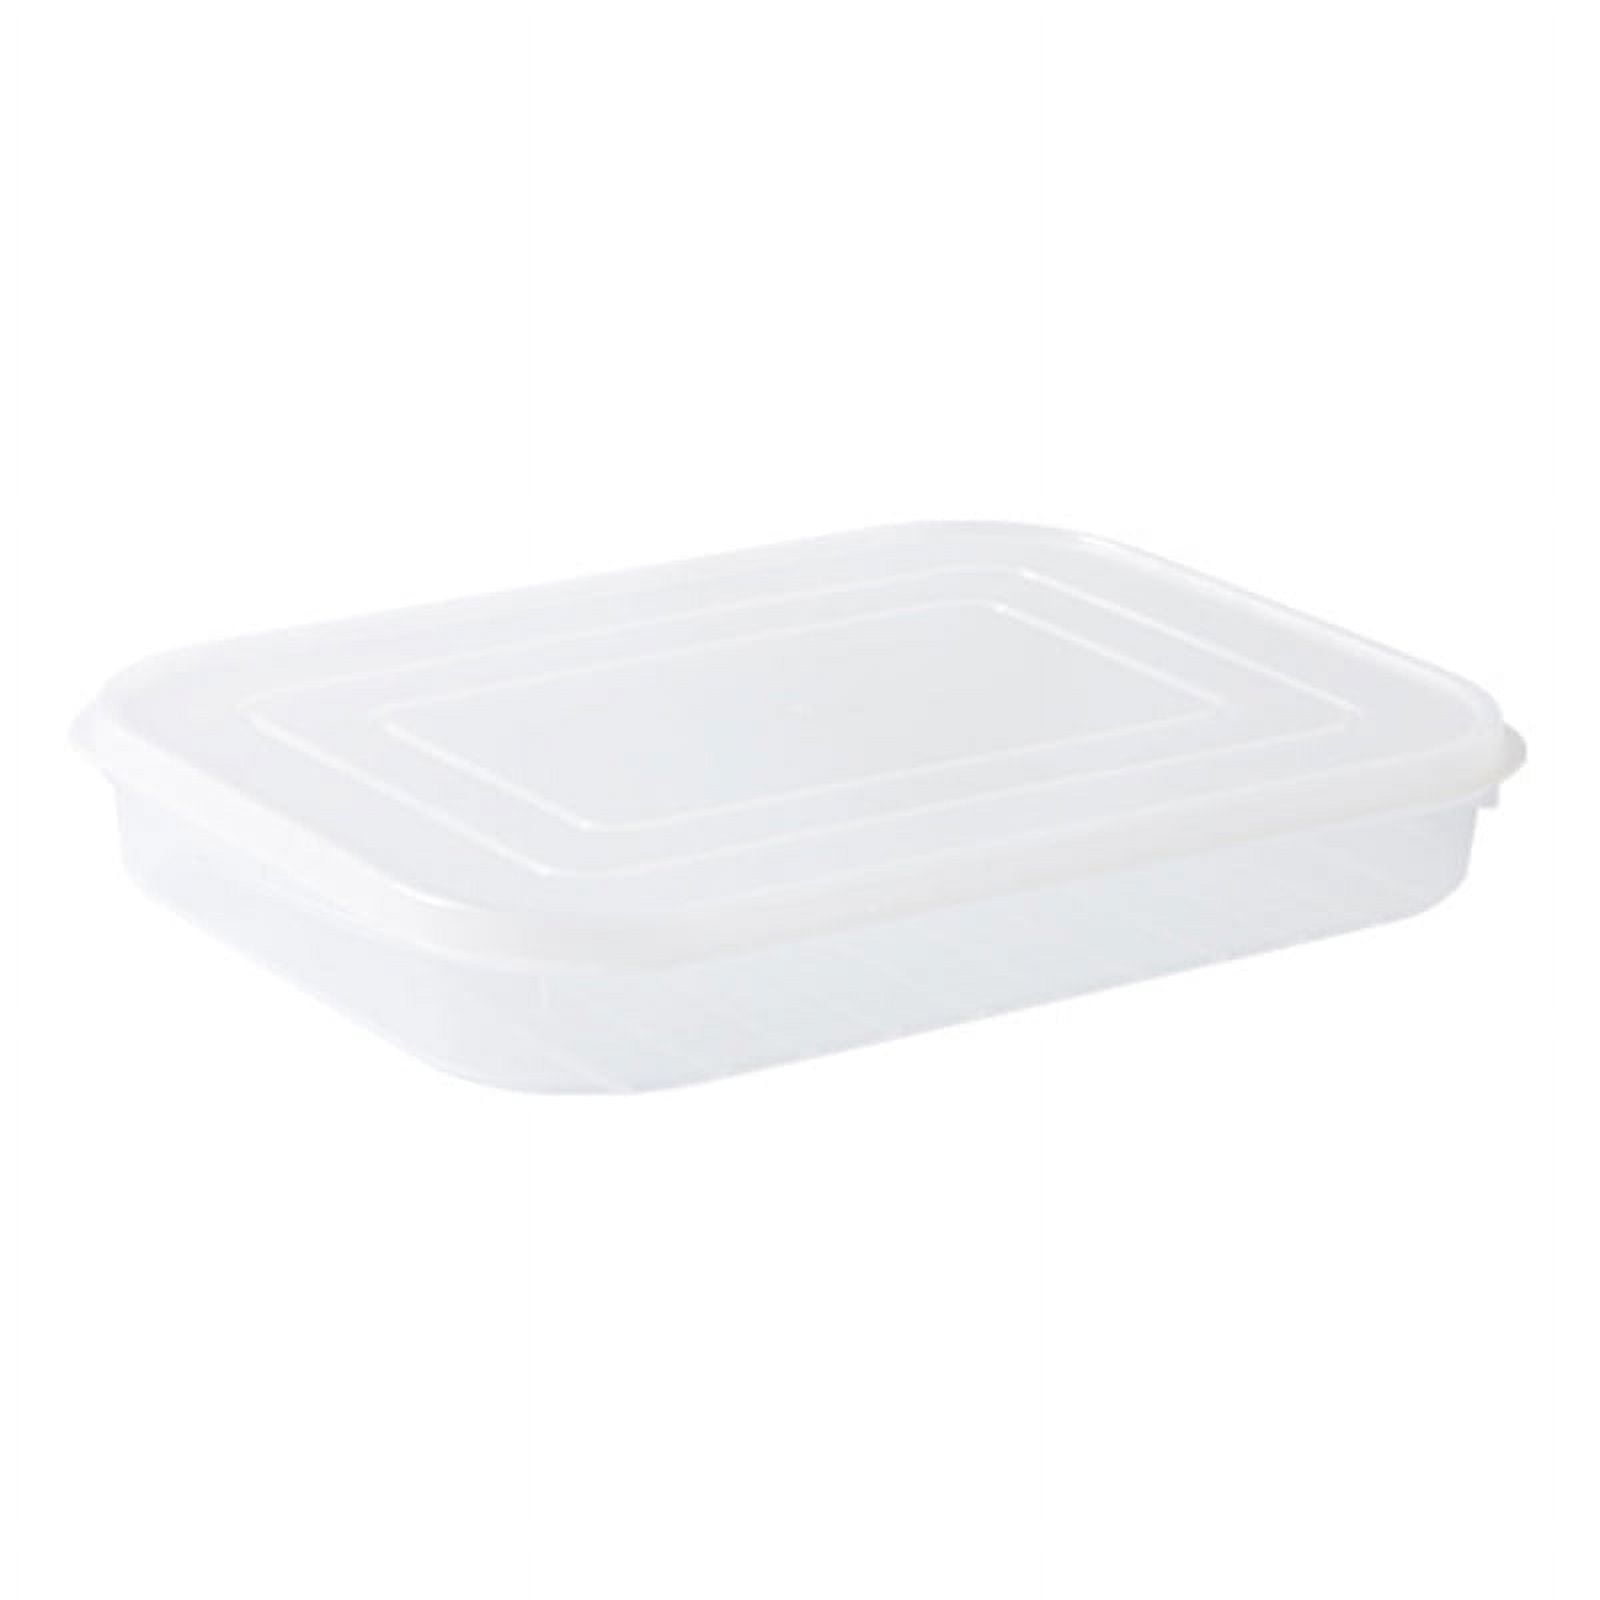 Bacon Saver Plastic Deli Meat Saver With Lid Airtight Cold Cut